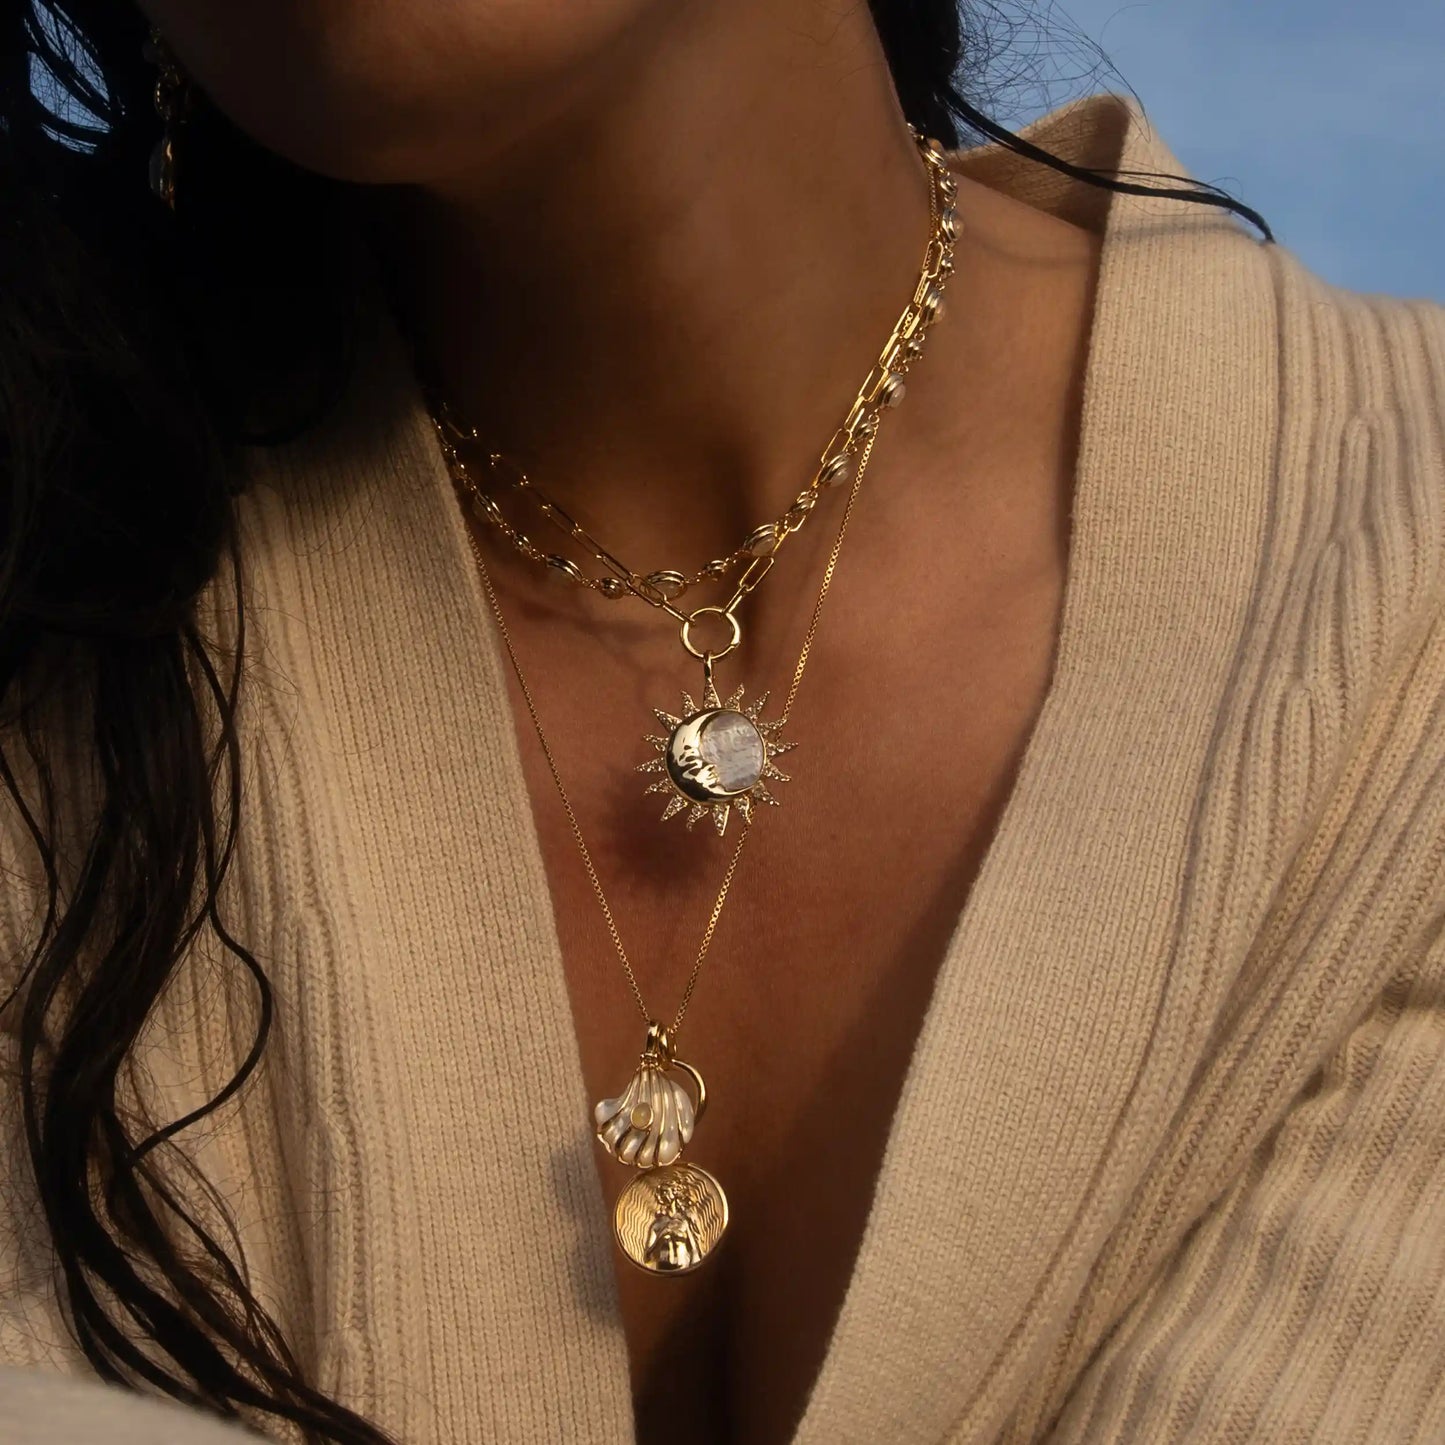 Aphrodite Necklace by Awe Inspired